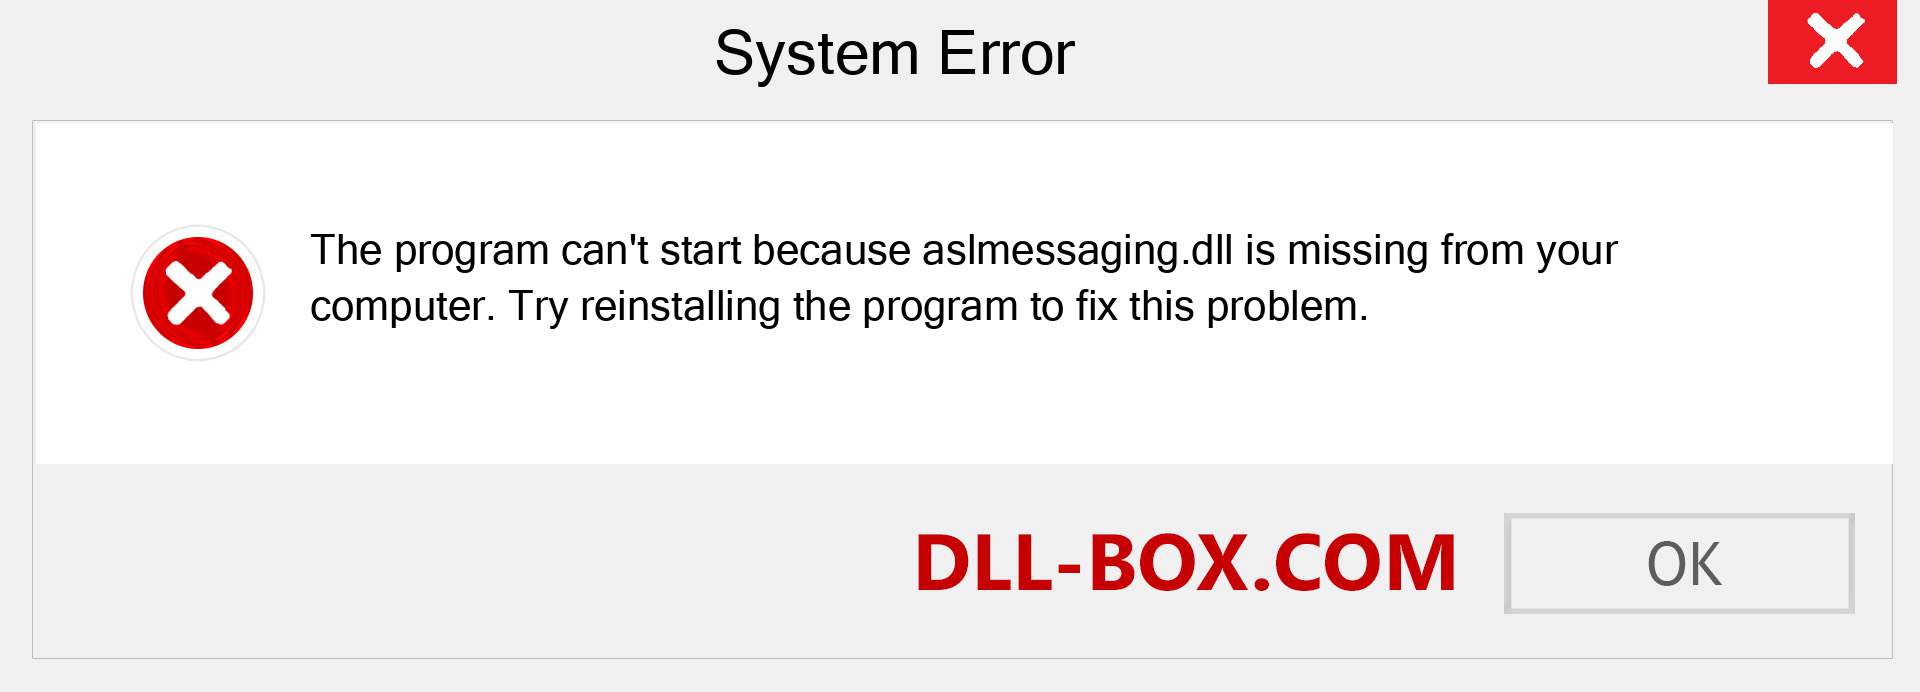  aslmessaging.dll file is missing?. Download for Windows 7, 8, 10 - Fix  aslmessaging dll Missing Error on Windows, photos, images